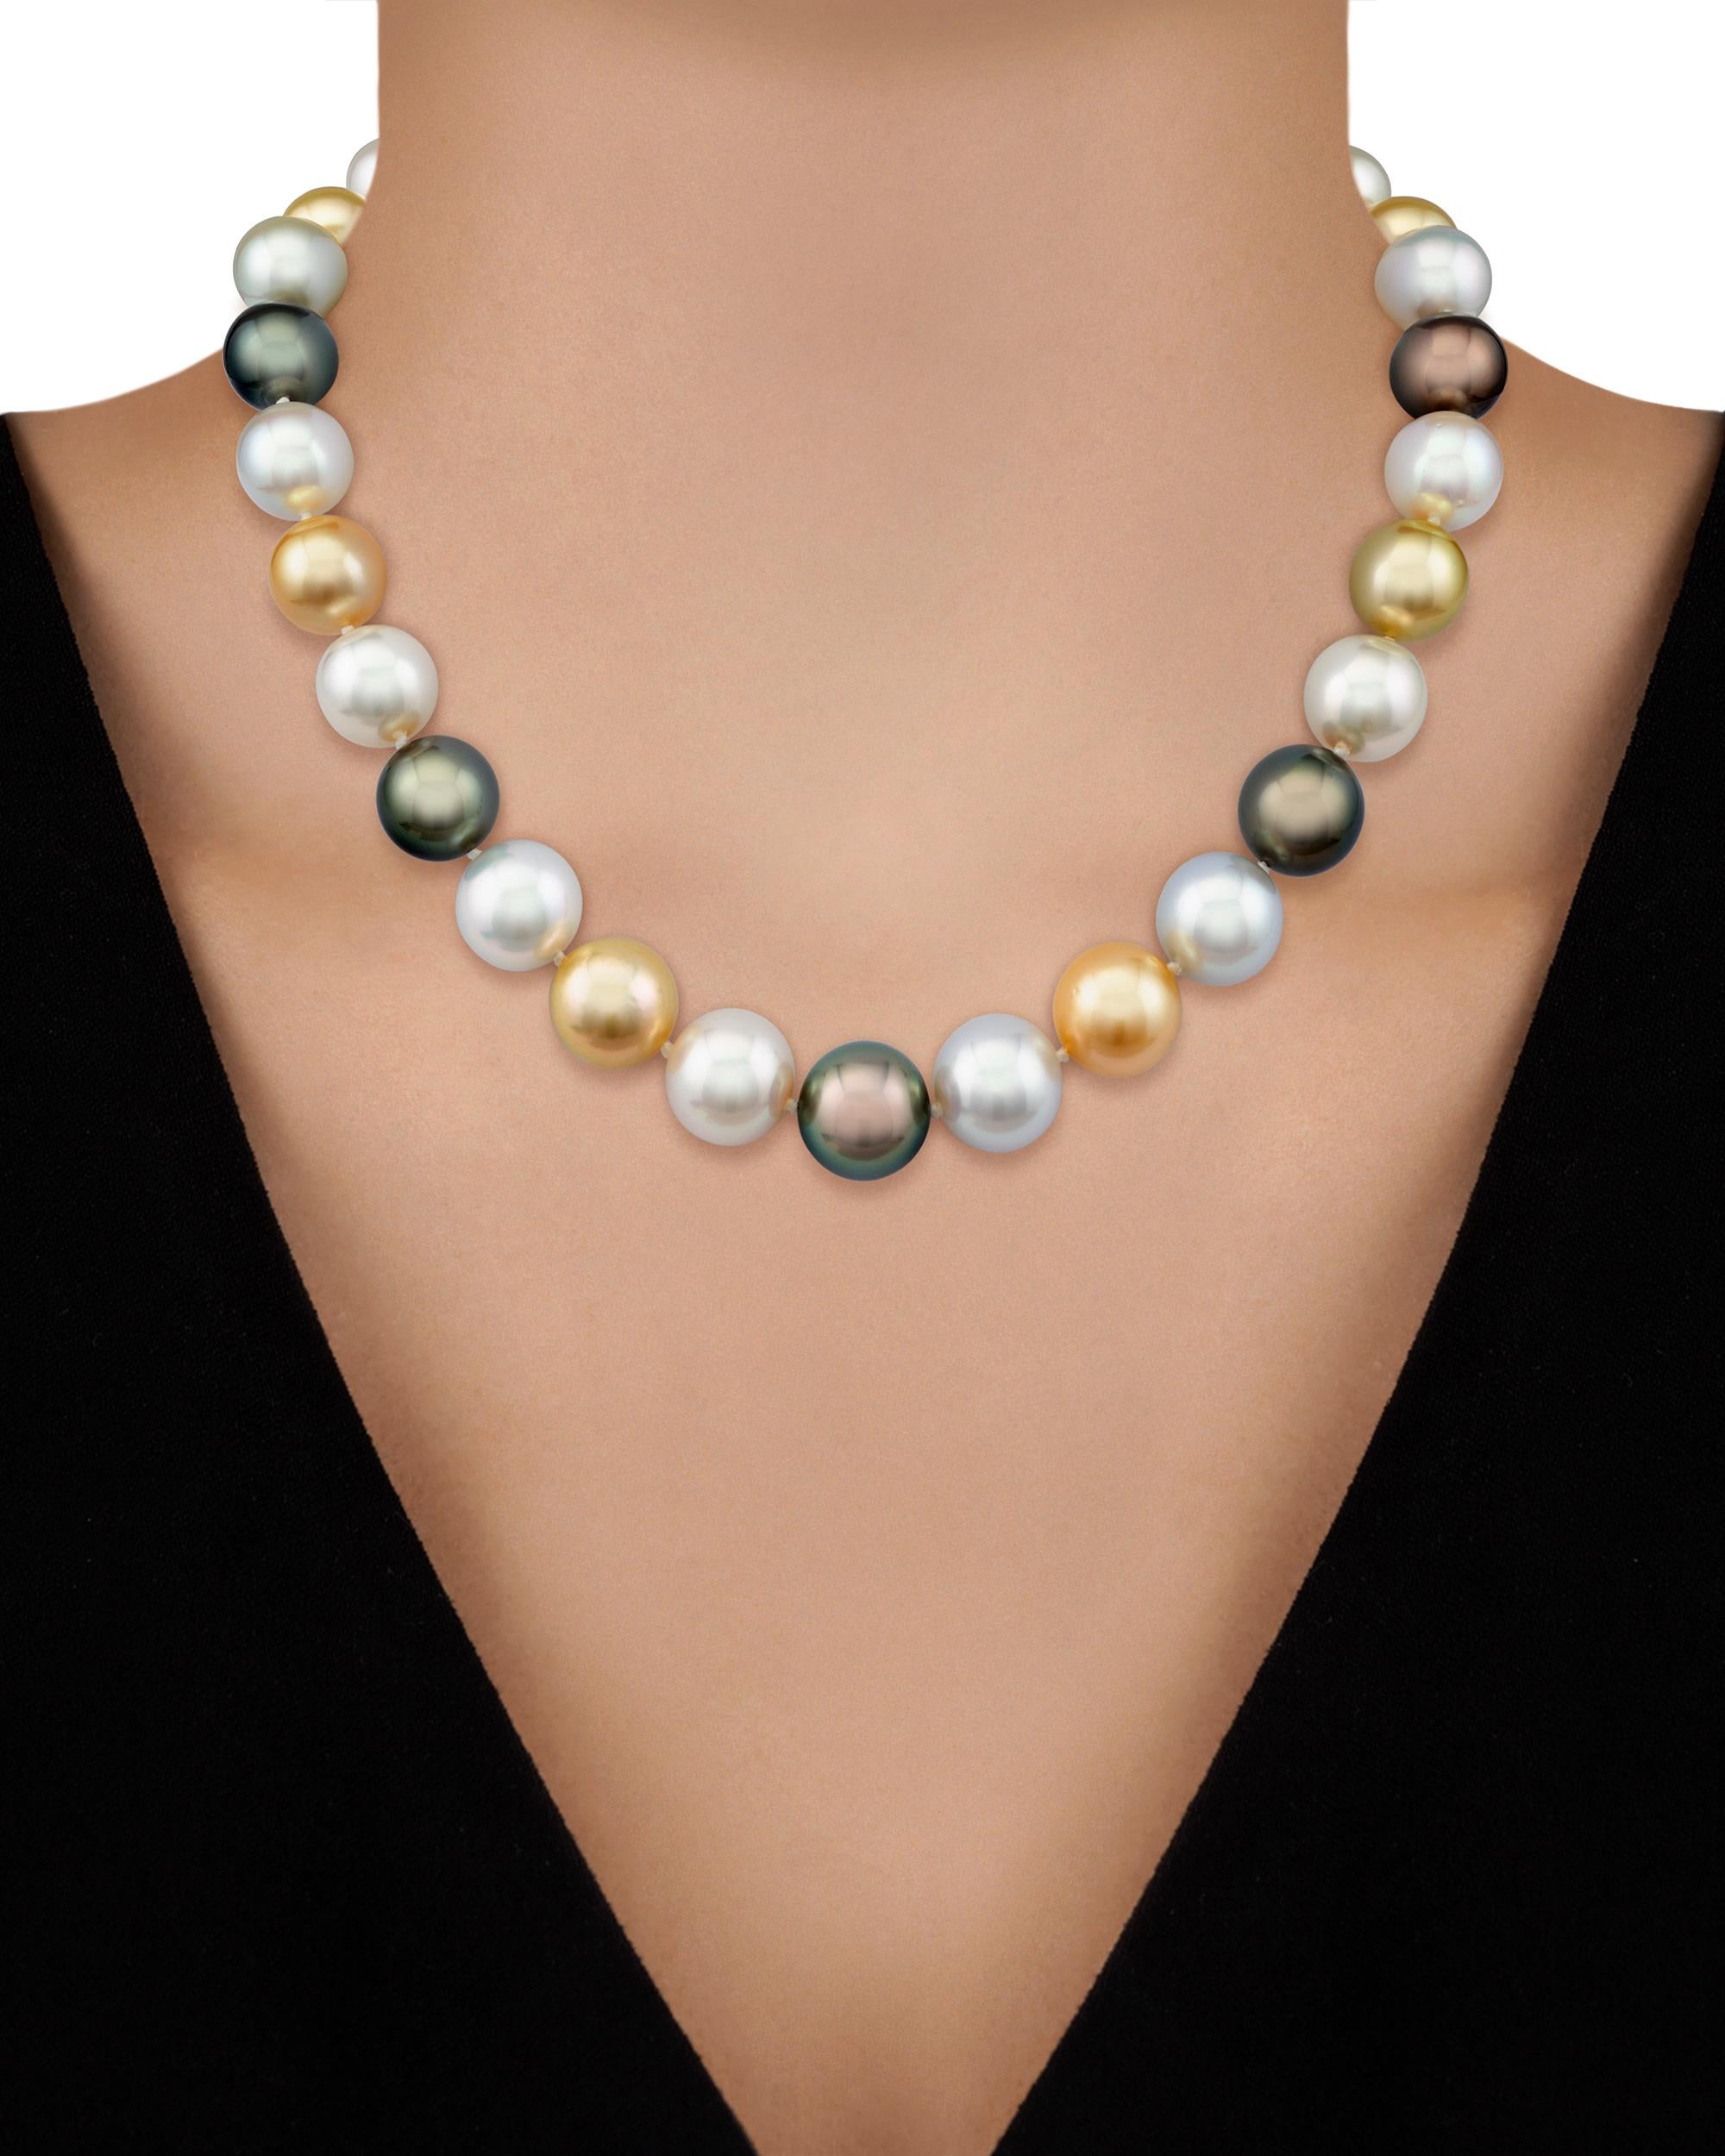 Outstanding in quality and design, this single strand of South Sea pearls exhibits the wide array of color. Exhibiting hues ranging from lustrous white and shades of gray to deep black and vibrant golds, these large pearls radiate from within and